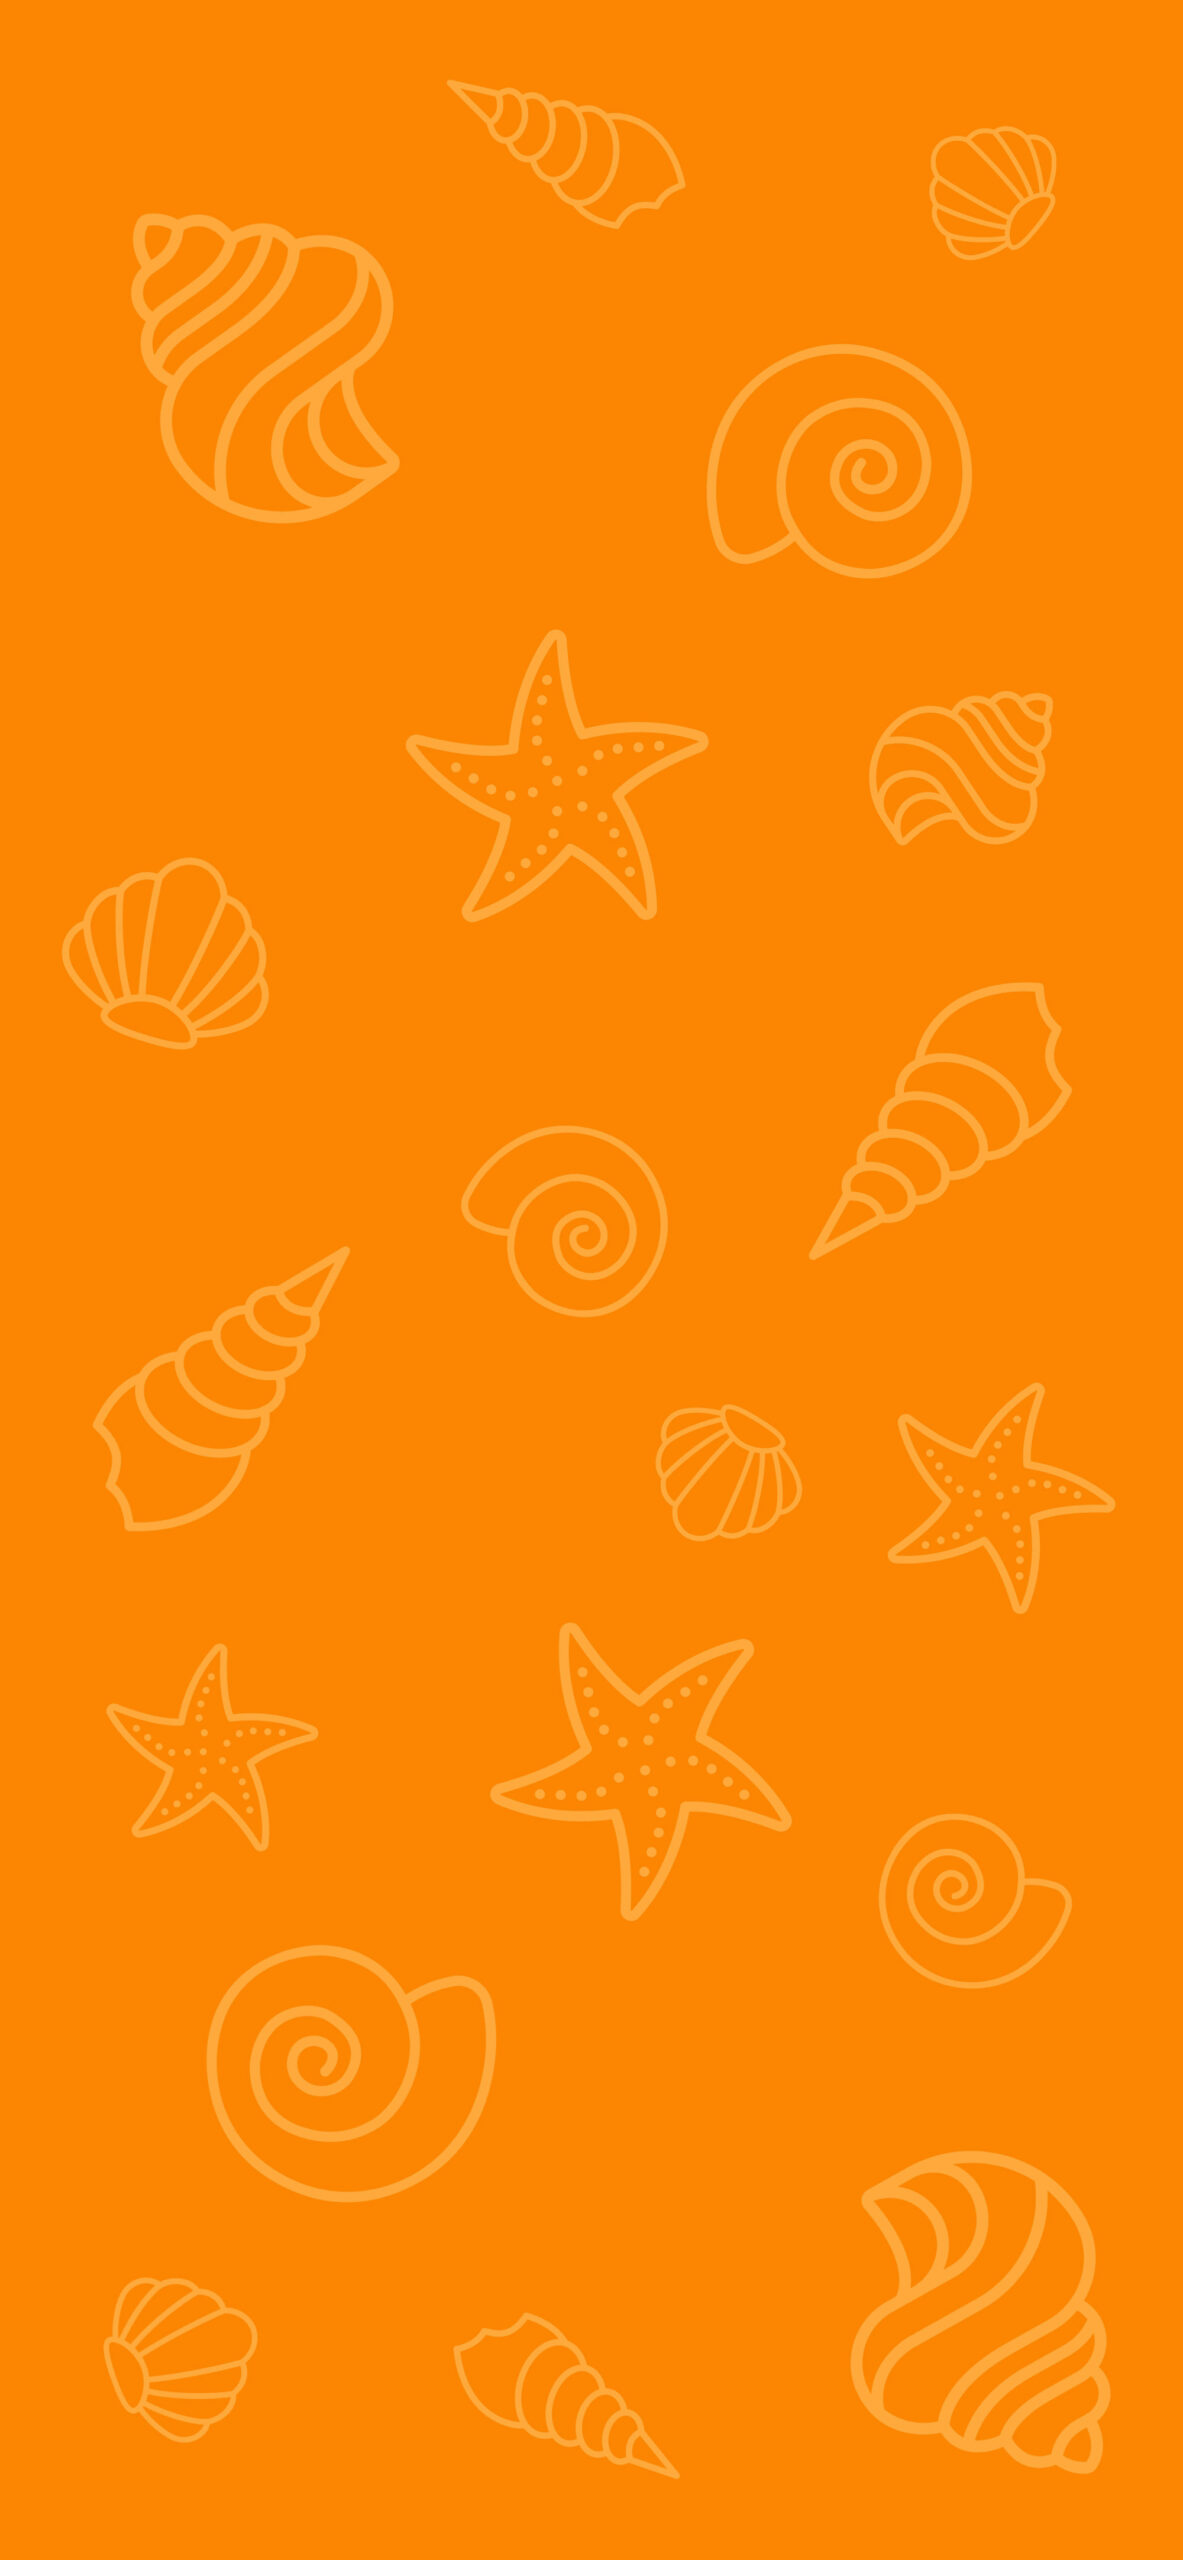 Shells Orange Aesthetic Wallpapers - Cute Summer Wallpapers for iPhone